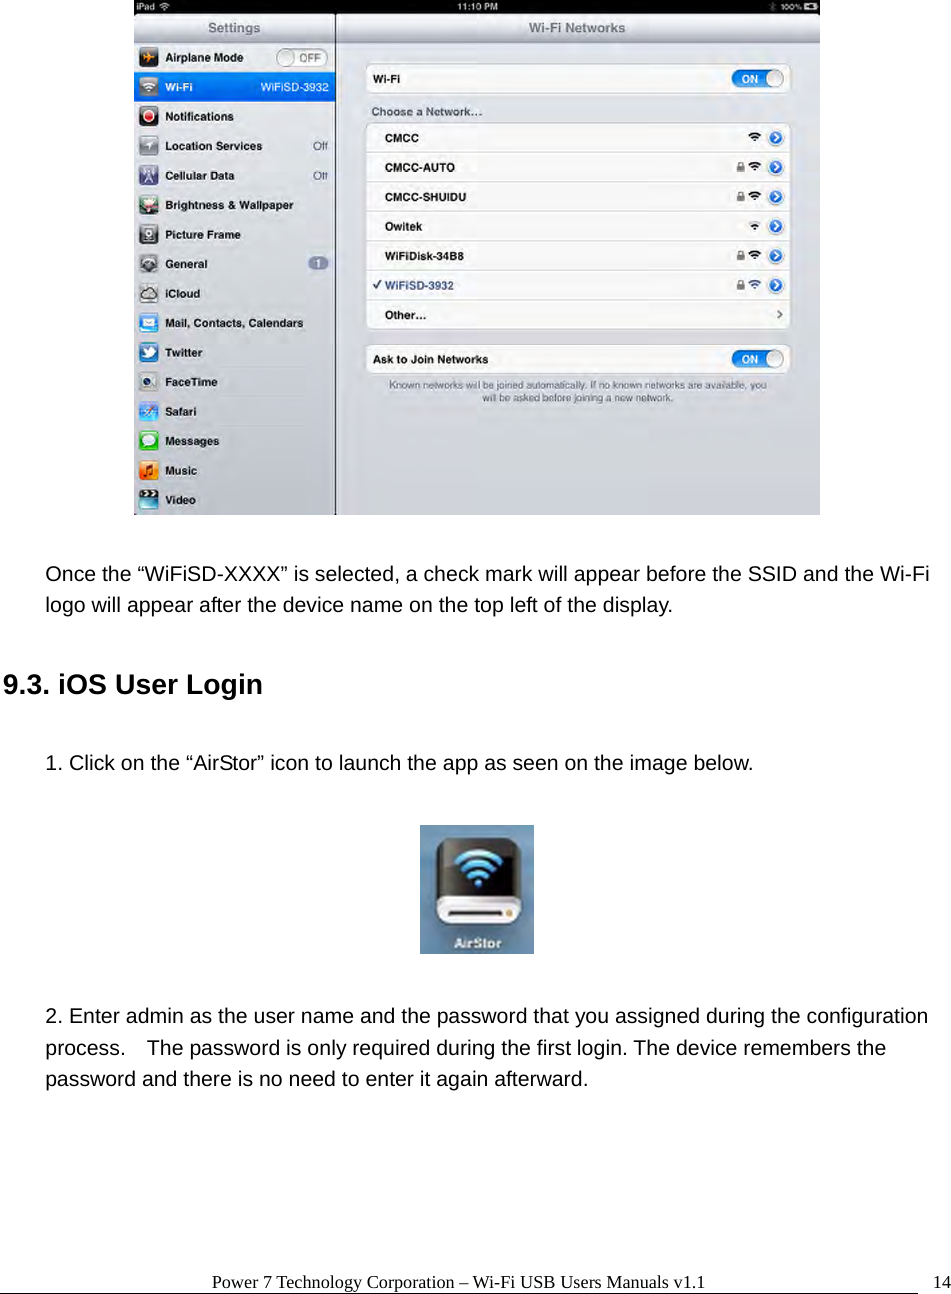 Power 7 Technology Corporation – Wi-Fi USB Users Manuals v1.1  14   Once the “WiFiSD-XXXX” is selected, a check mark will appear before the SSID and the Wi-Fi logo will appear after the device name on the top left of the display.  9.3. iOS User Login  1. Click on the “AirStor” icon to launch the app as seen on the image below.    2. Enter admin as the user name and the password that you assigned during the configuration process.    The password is only required during the first login. The device remembers the password and there is no need to enter it again afterward.  